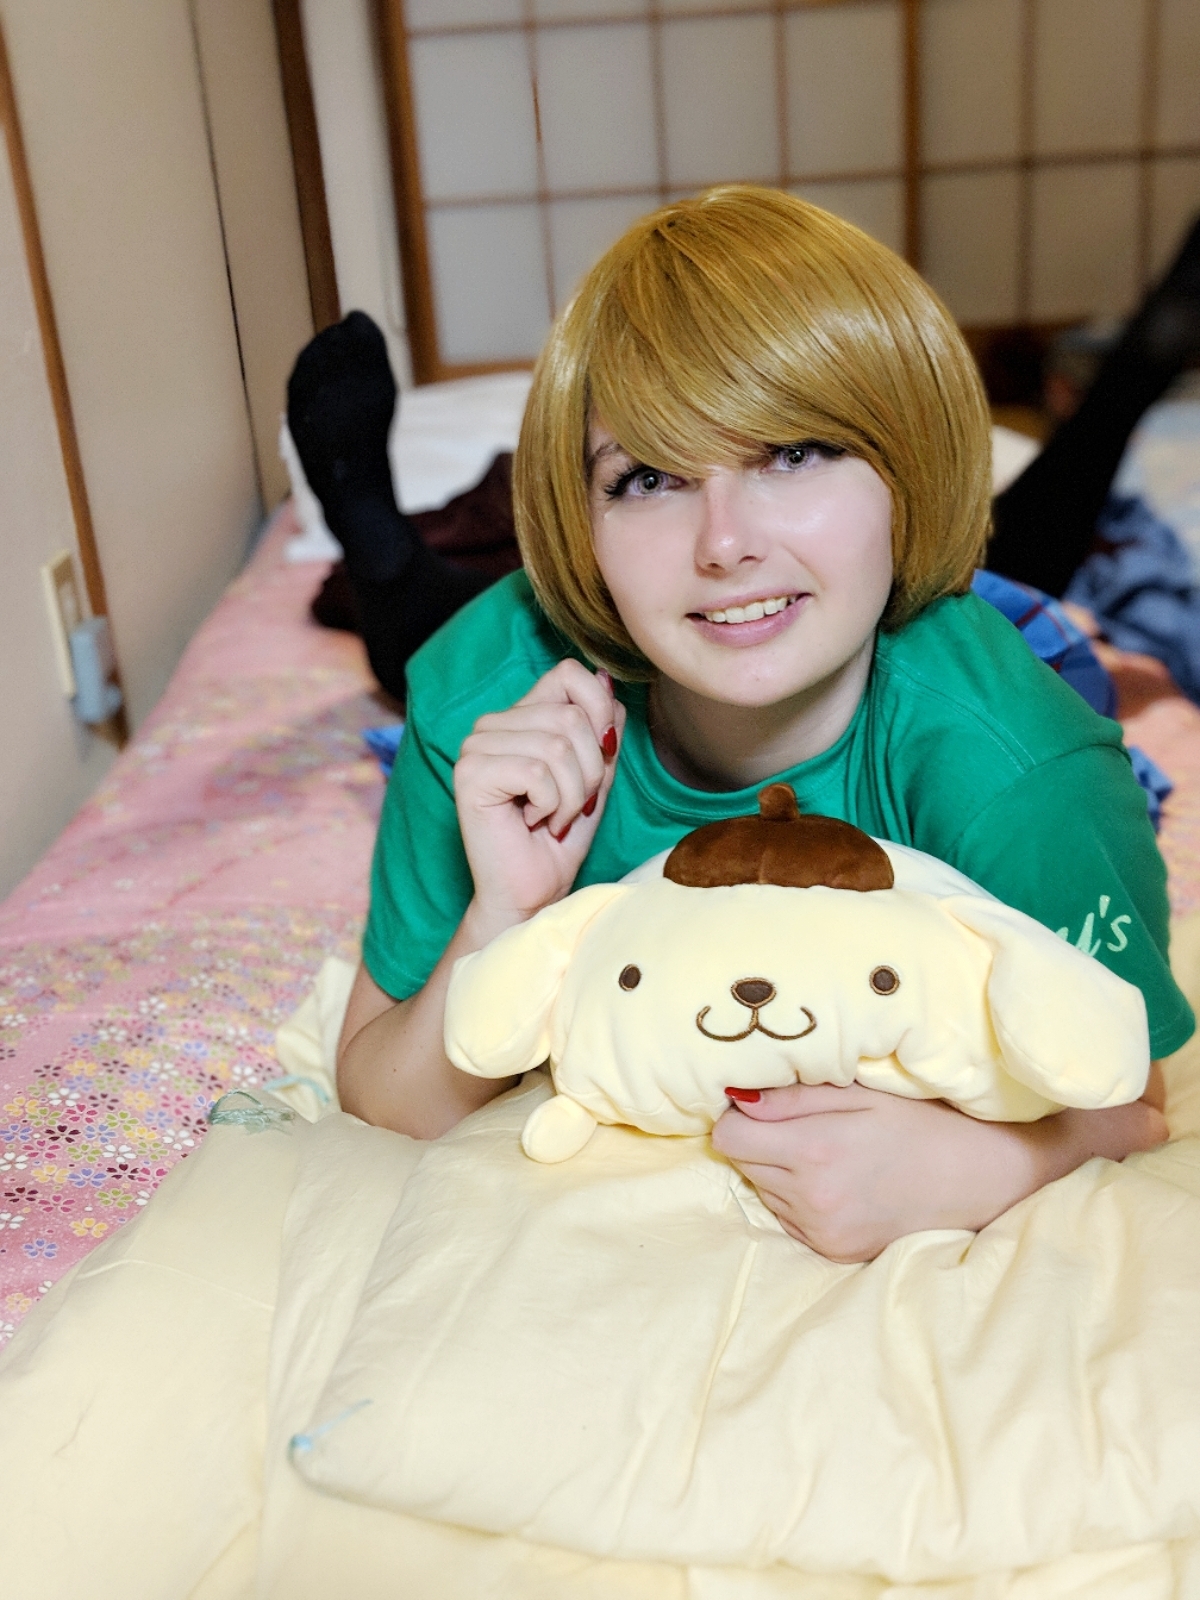 Cospix.net photo featuring Petite Purin